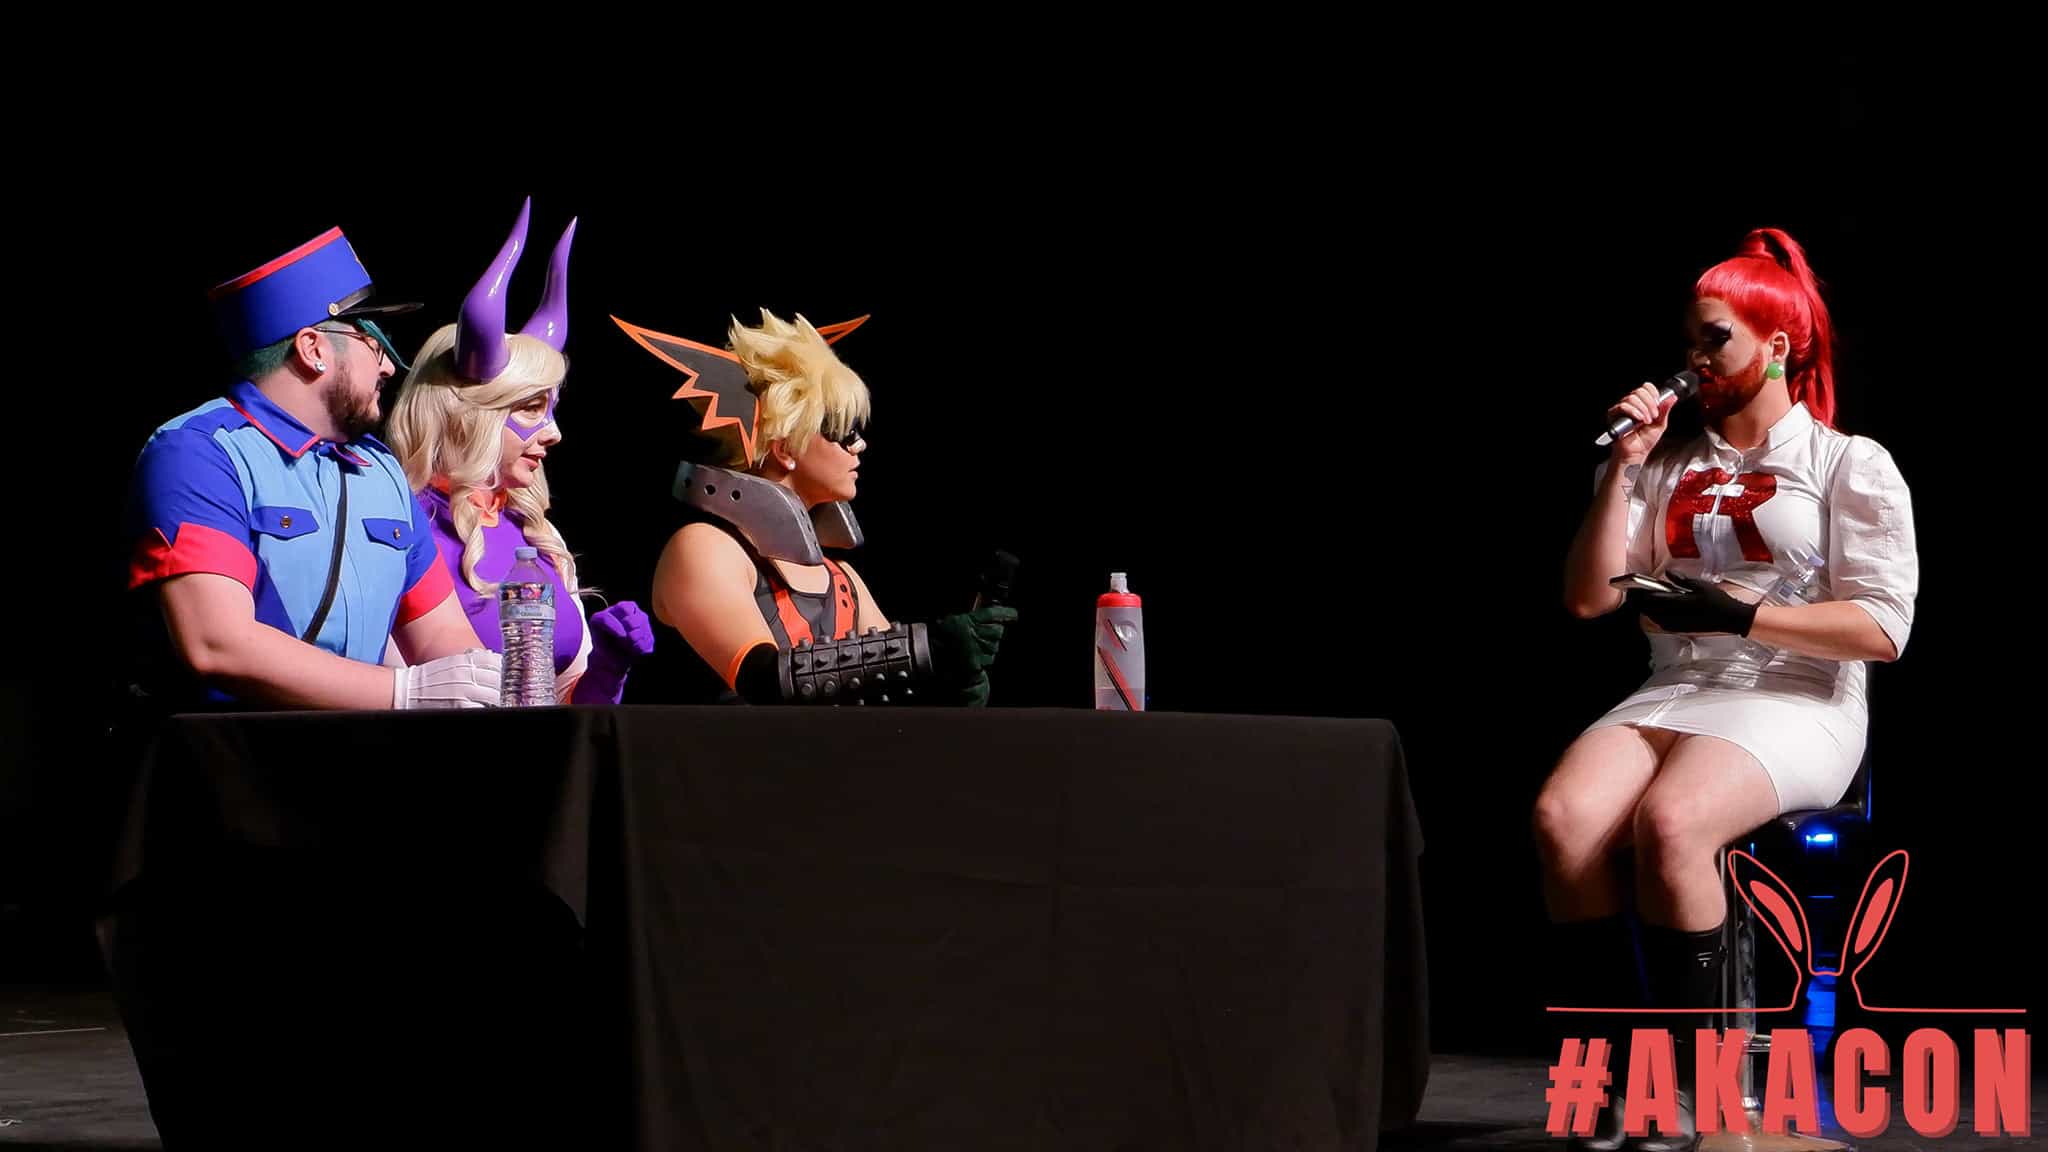 Akacon Let's go Akamaru convention 2022 Queer Cosplay Panel